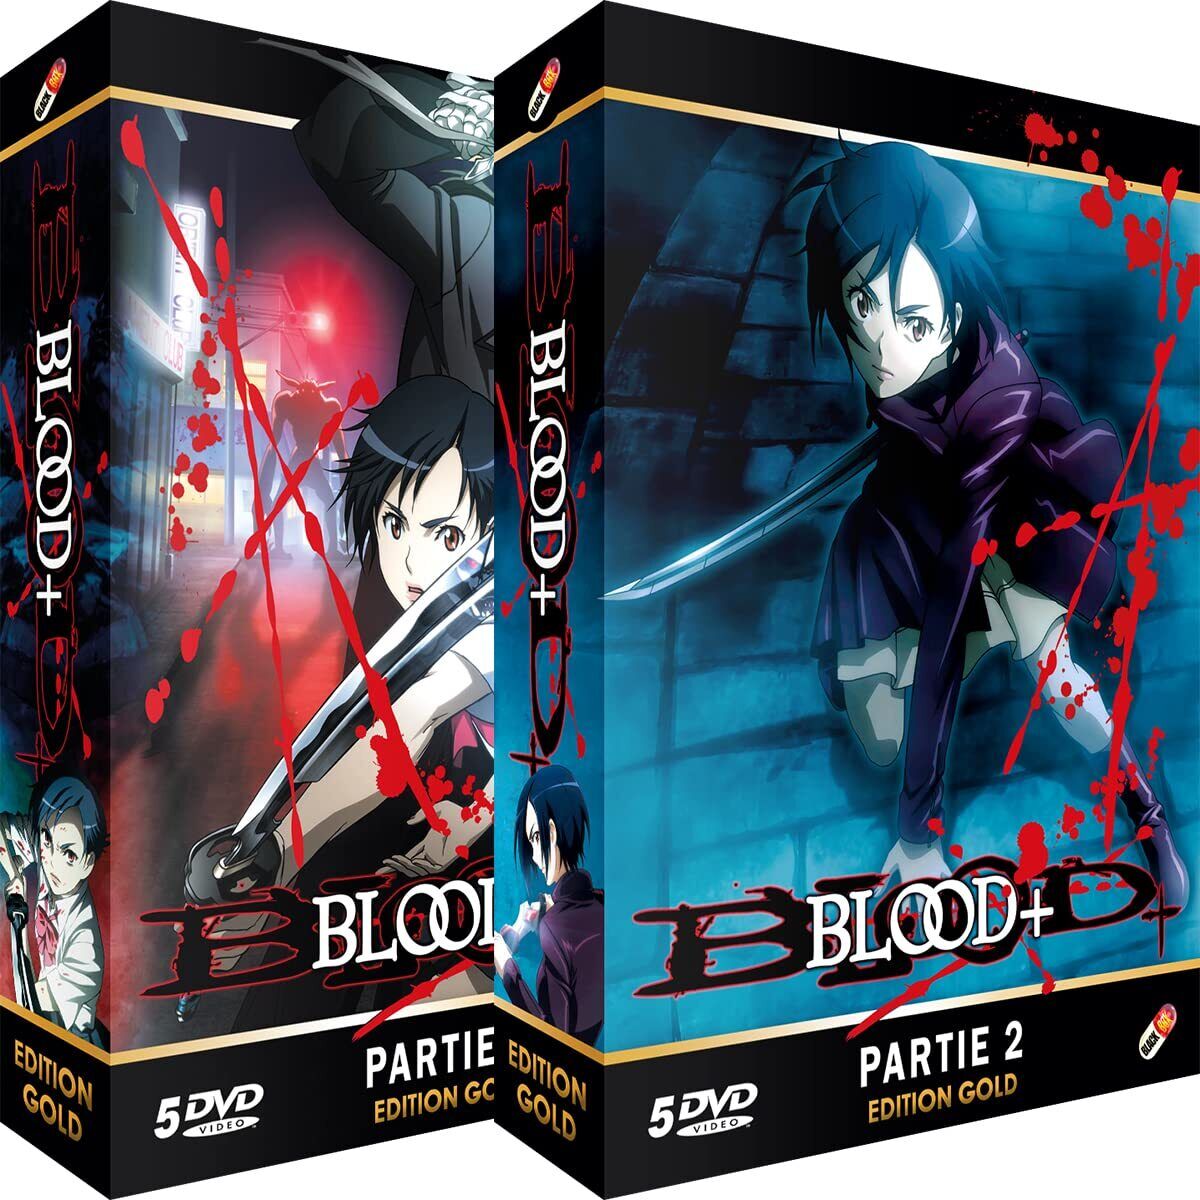 BLOOD+ Complete DVD-BOX 1-50 episodes 1250 minutes Anime French Japanese